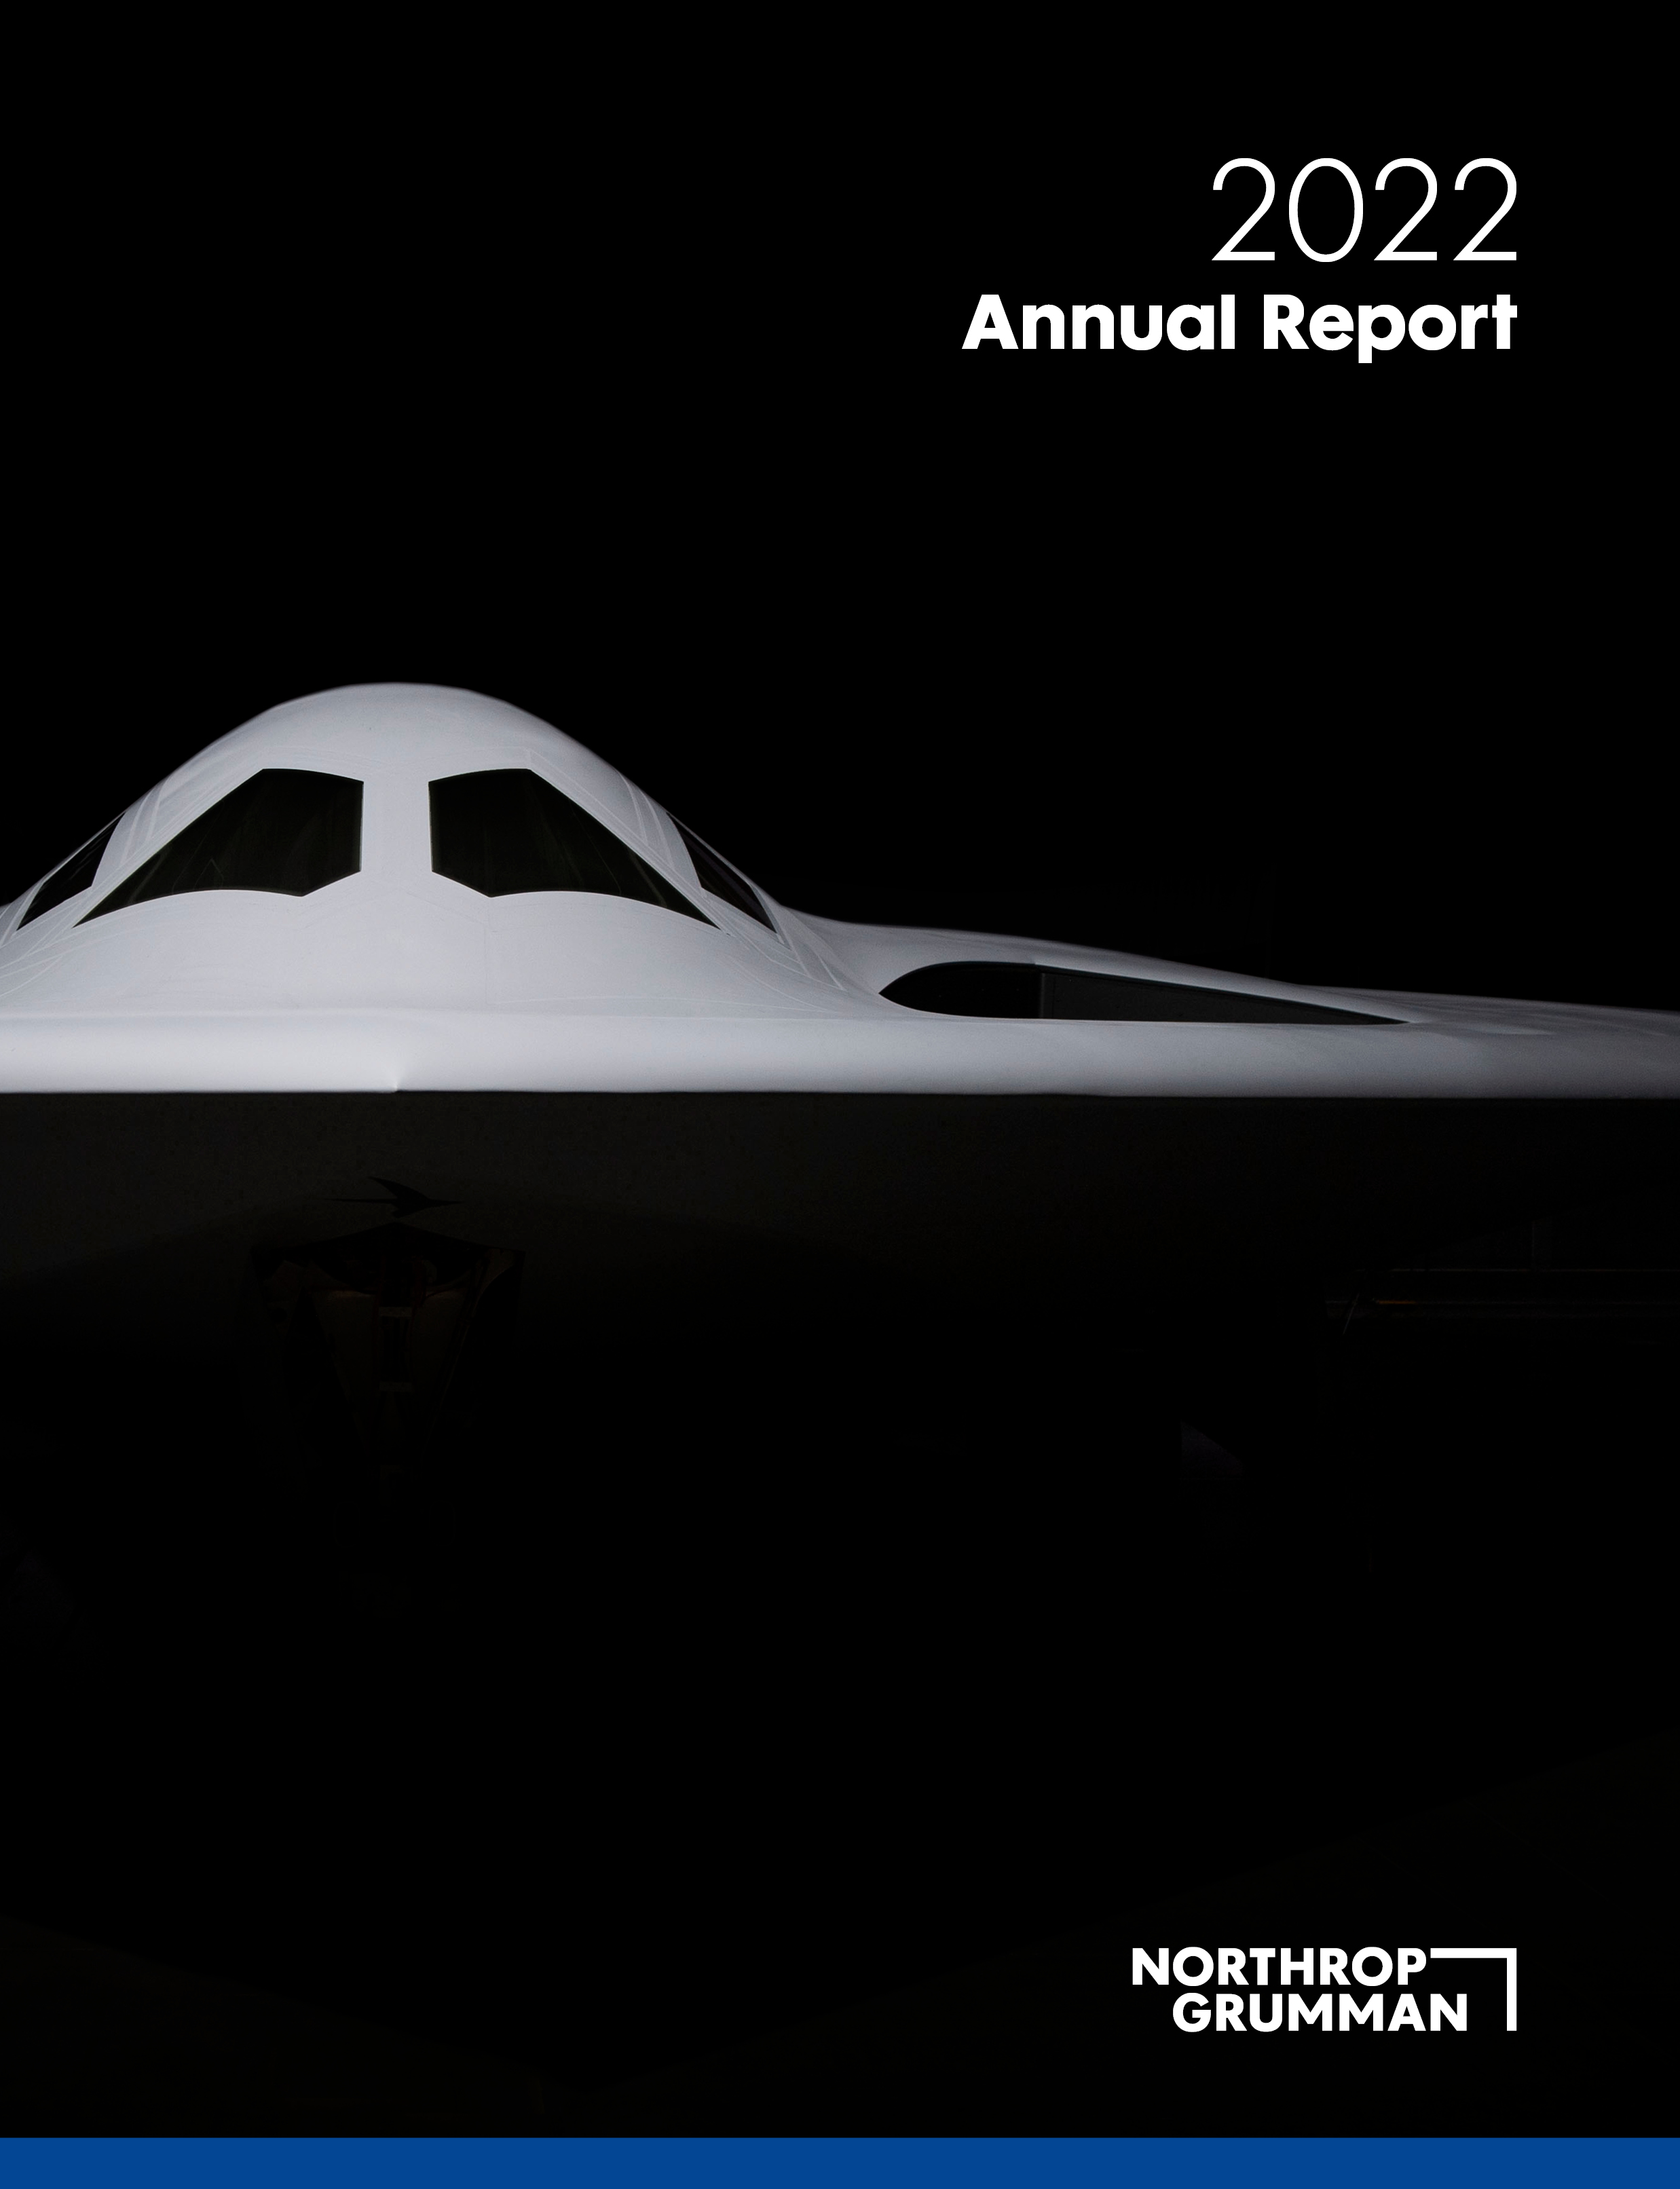 NG_2022_Annual_Report_Cover_B21.jpg